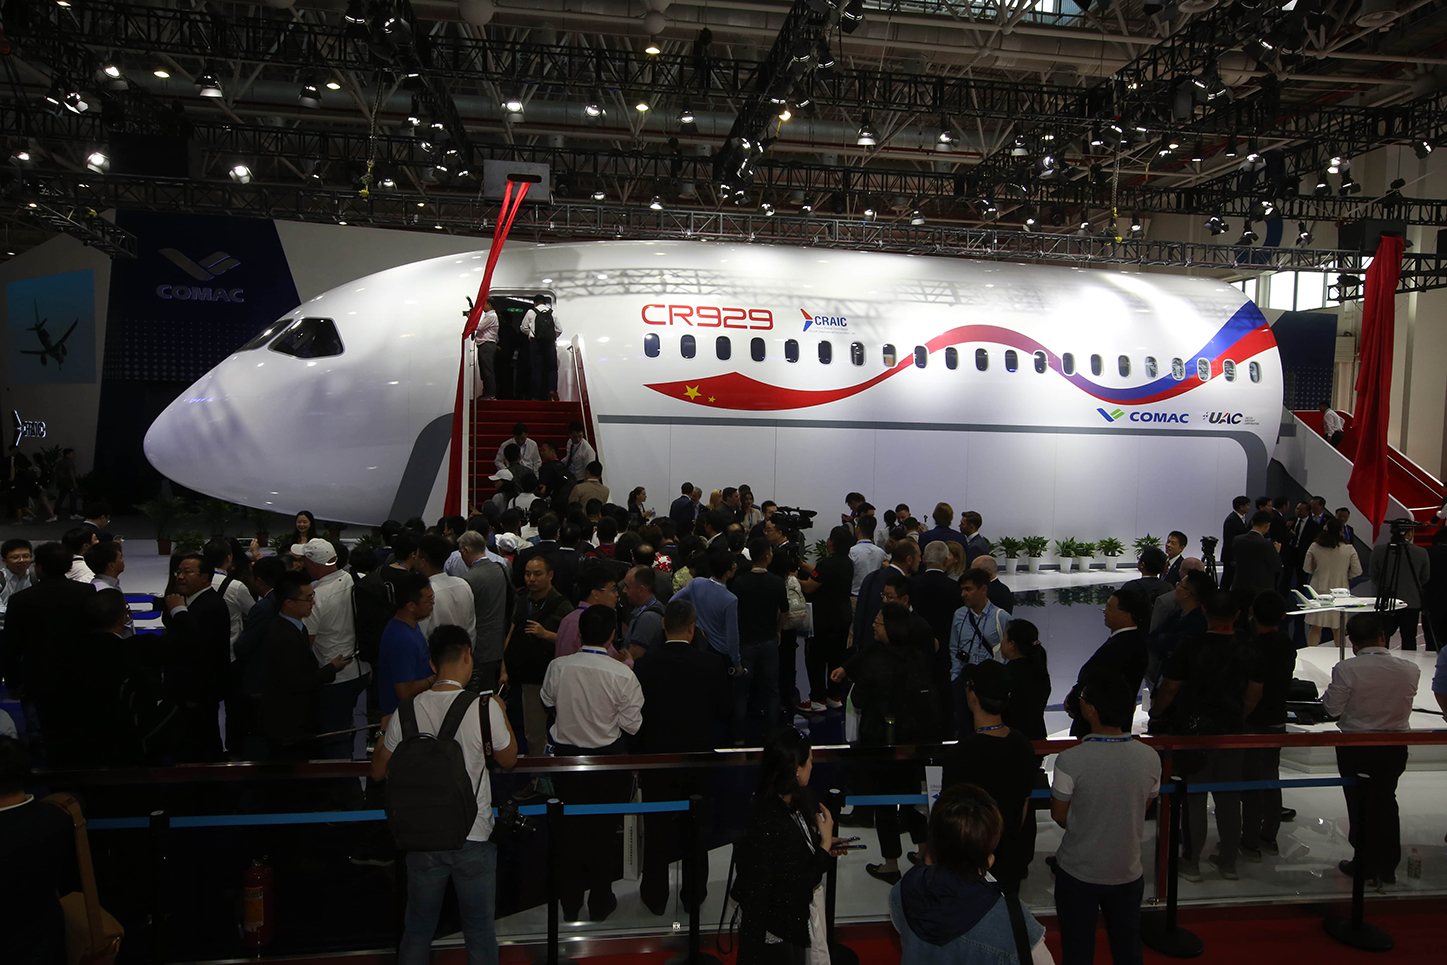 Premiere demonstration of full sized mock-up of Russian-Chinese CR929 has taken place during Zhuhai airshow